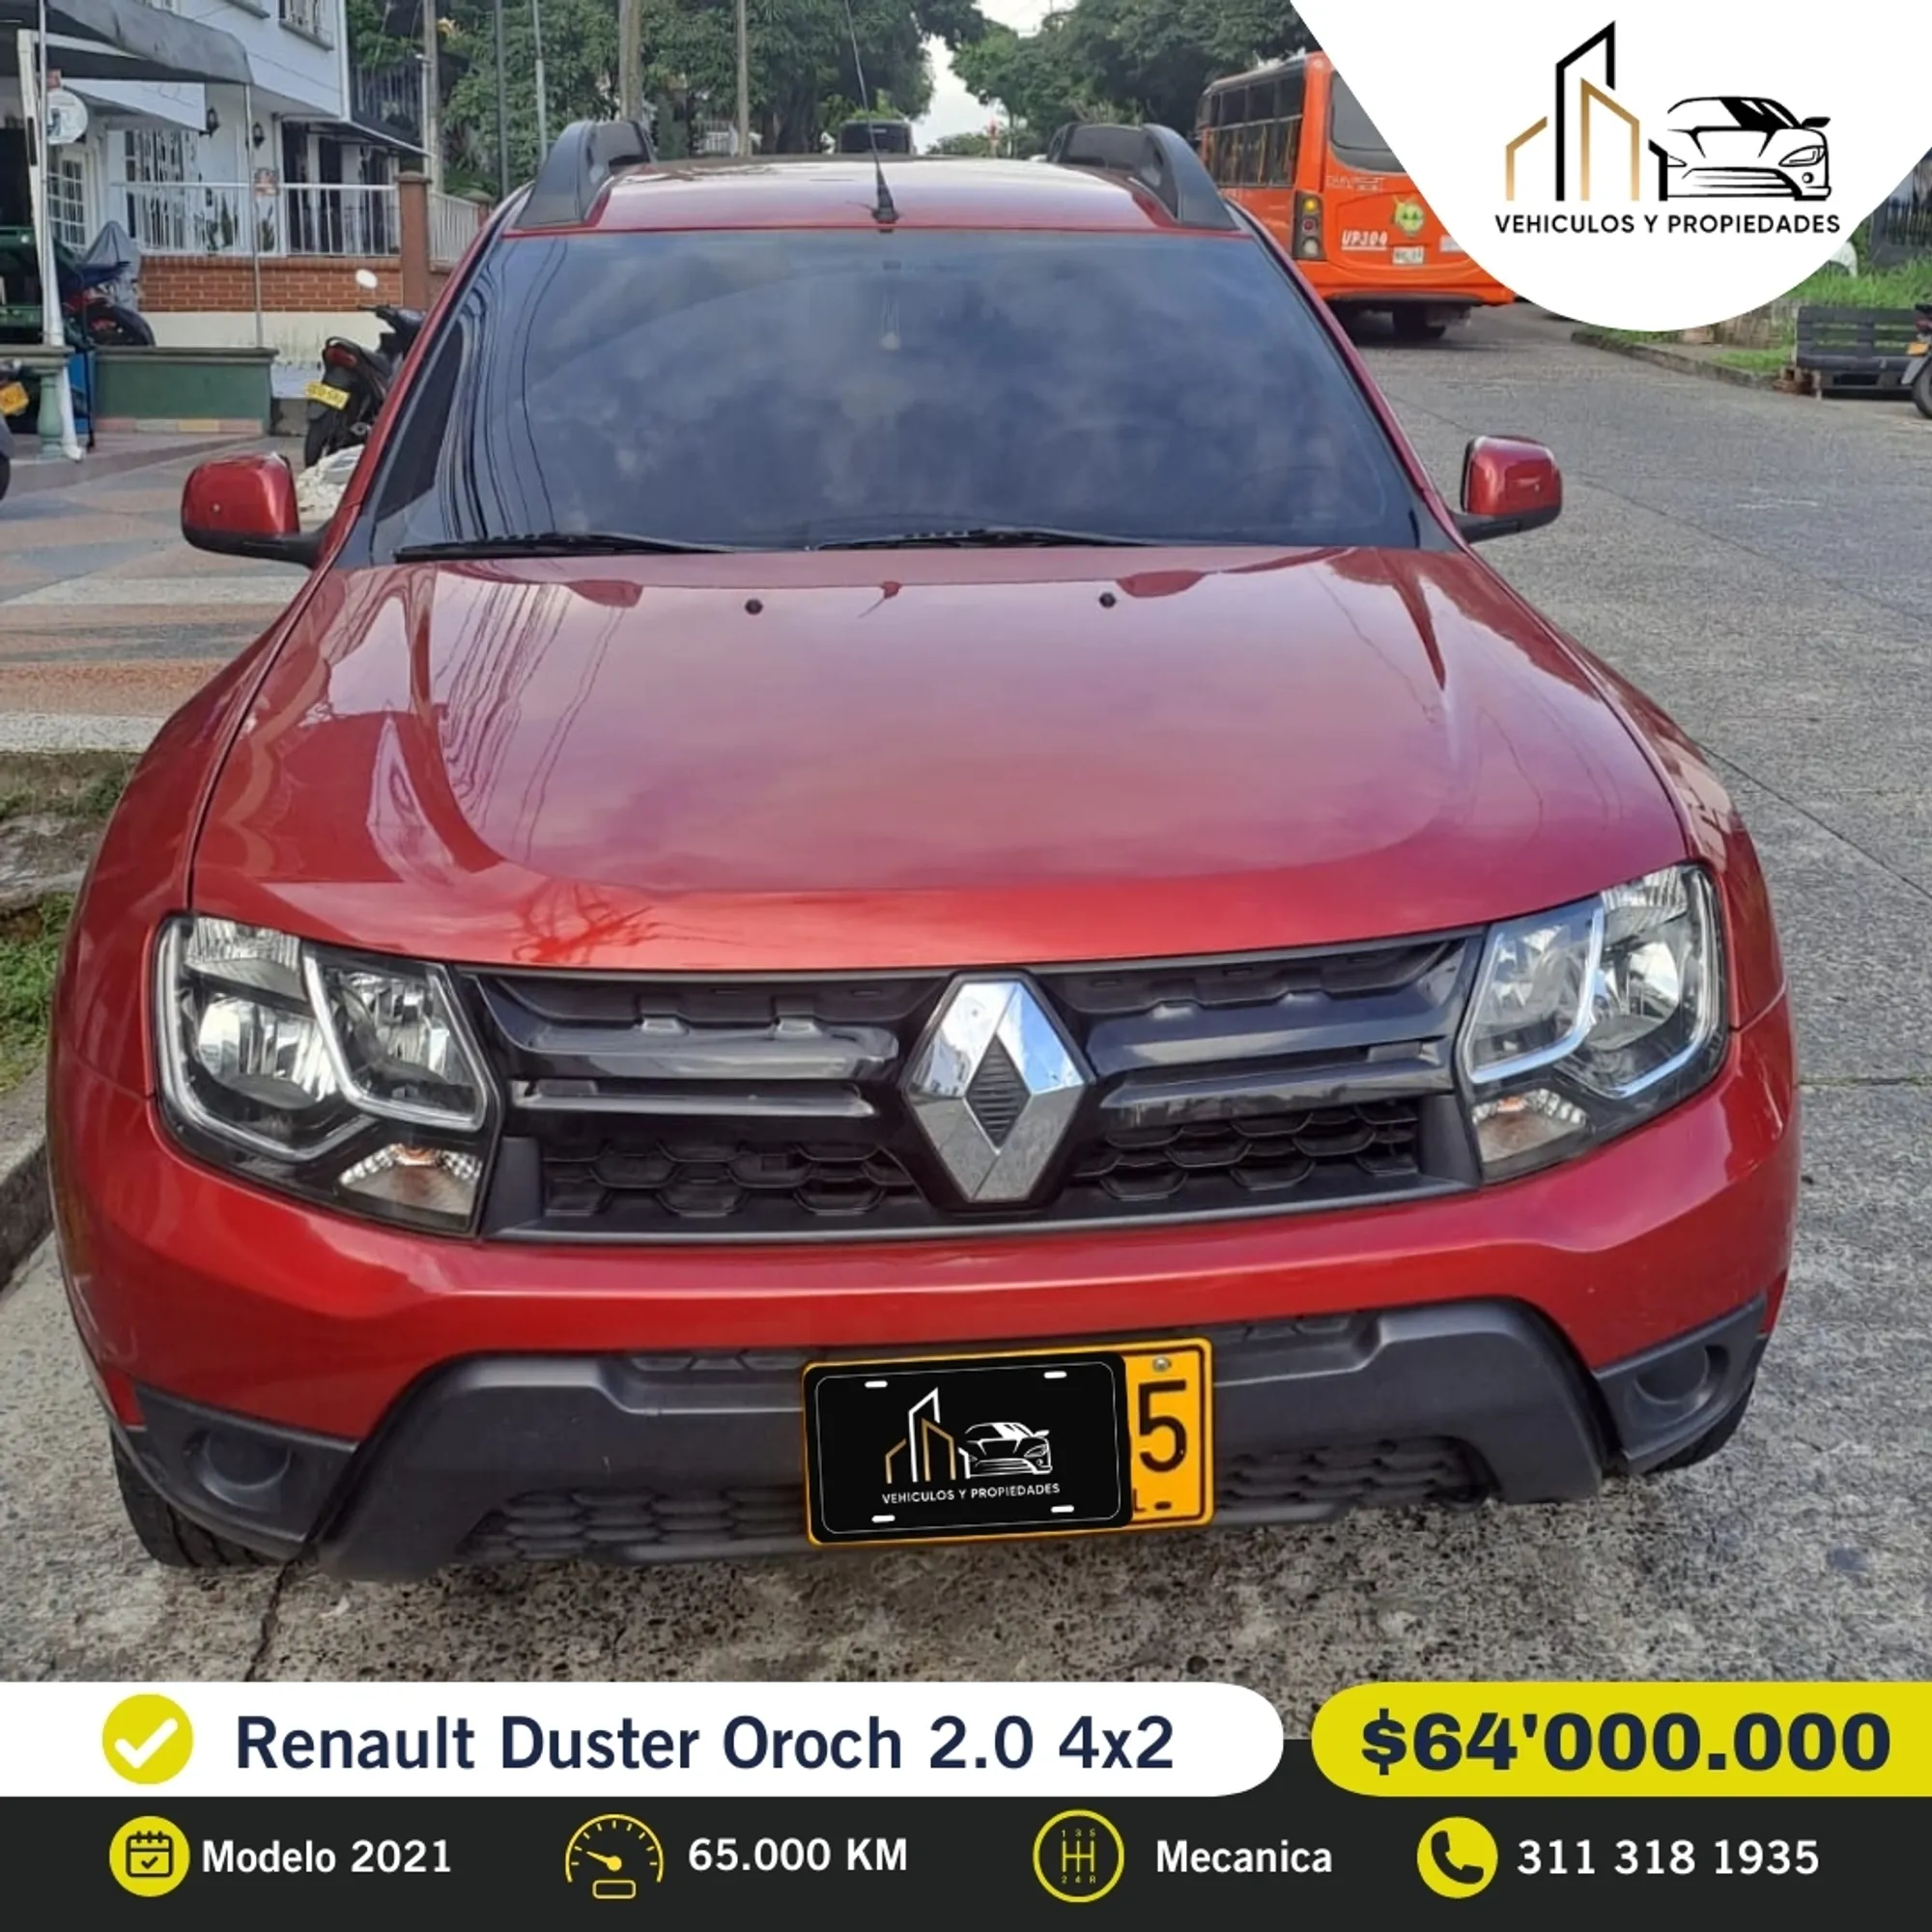 2021 Renault Duster Oroch 2.0 4x2